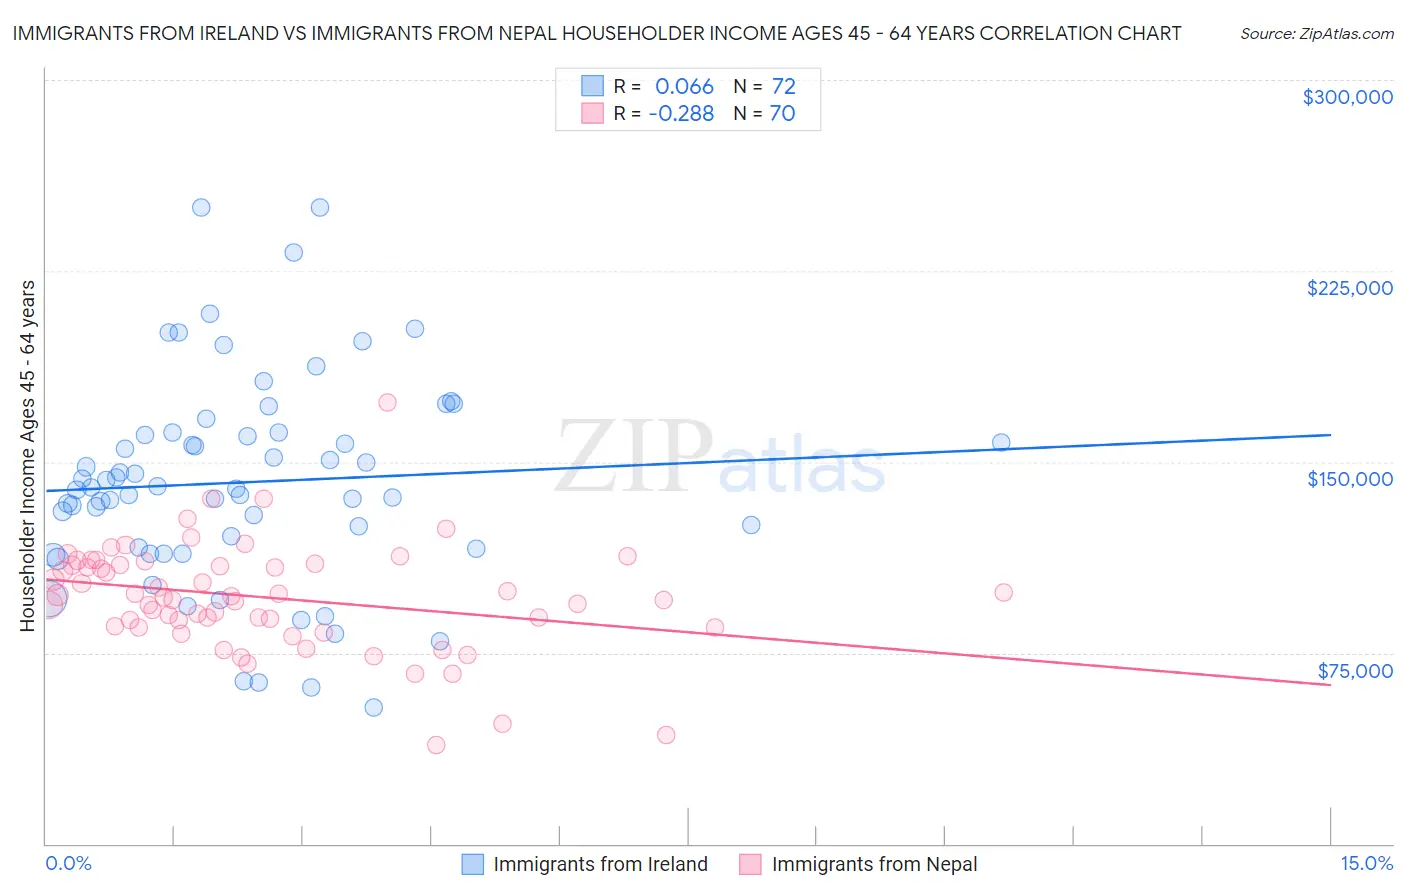 Immigrants from Ireland vs Immigrants from Nepal Householder Income Ages 45 - 64 years